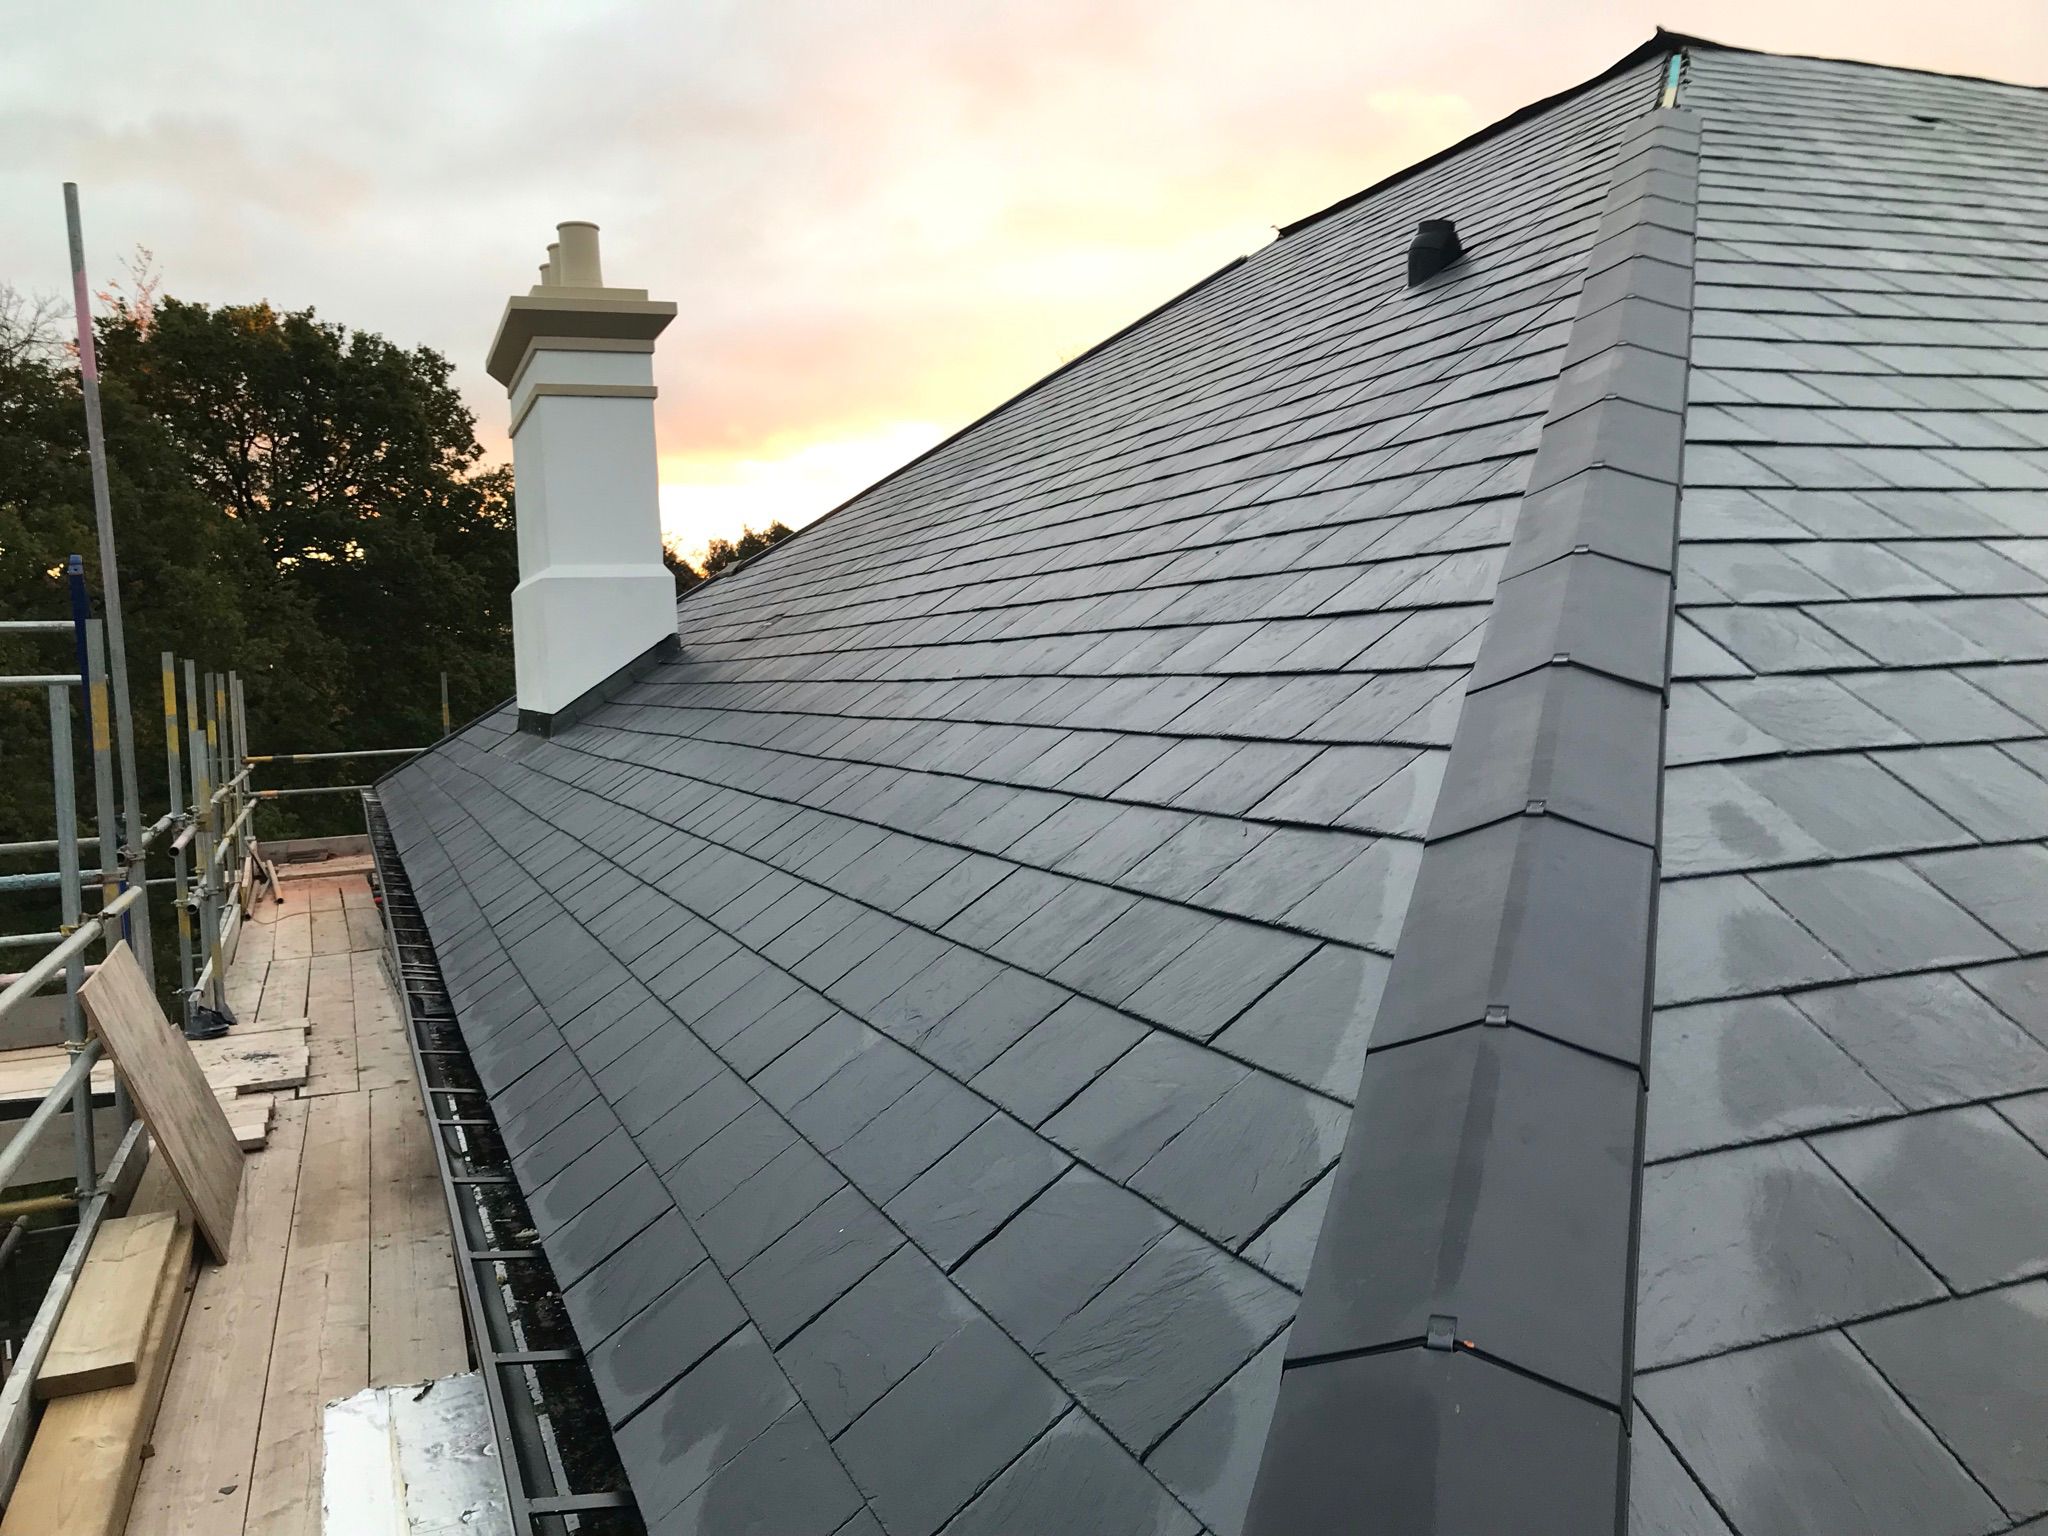 Main image for Rudders Roofing Stafford